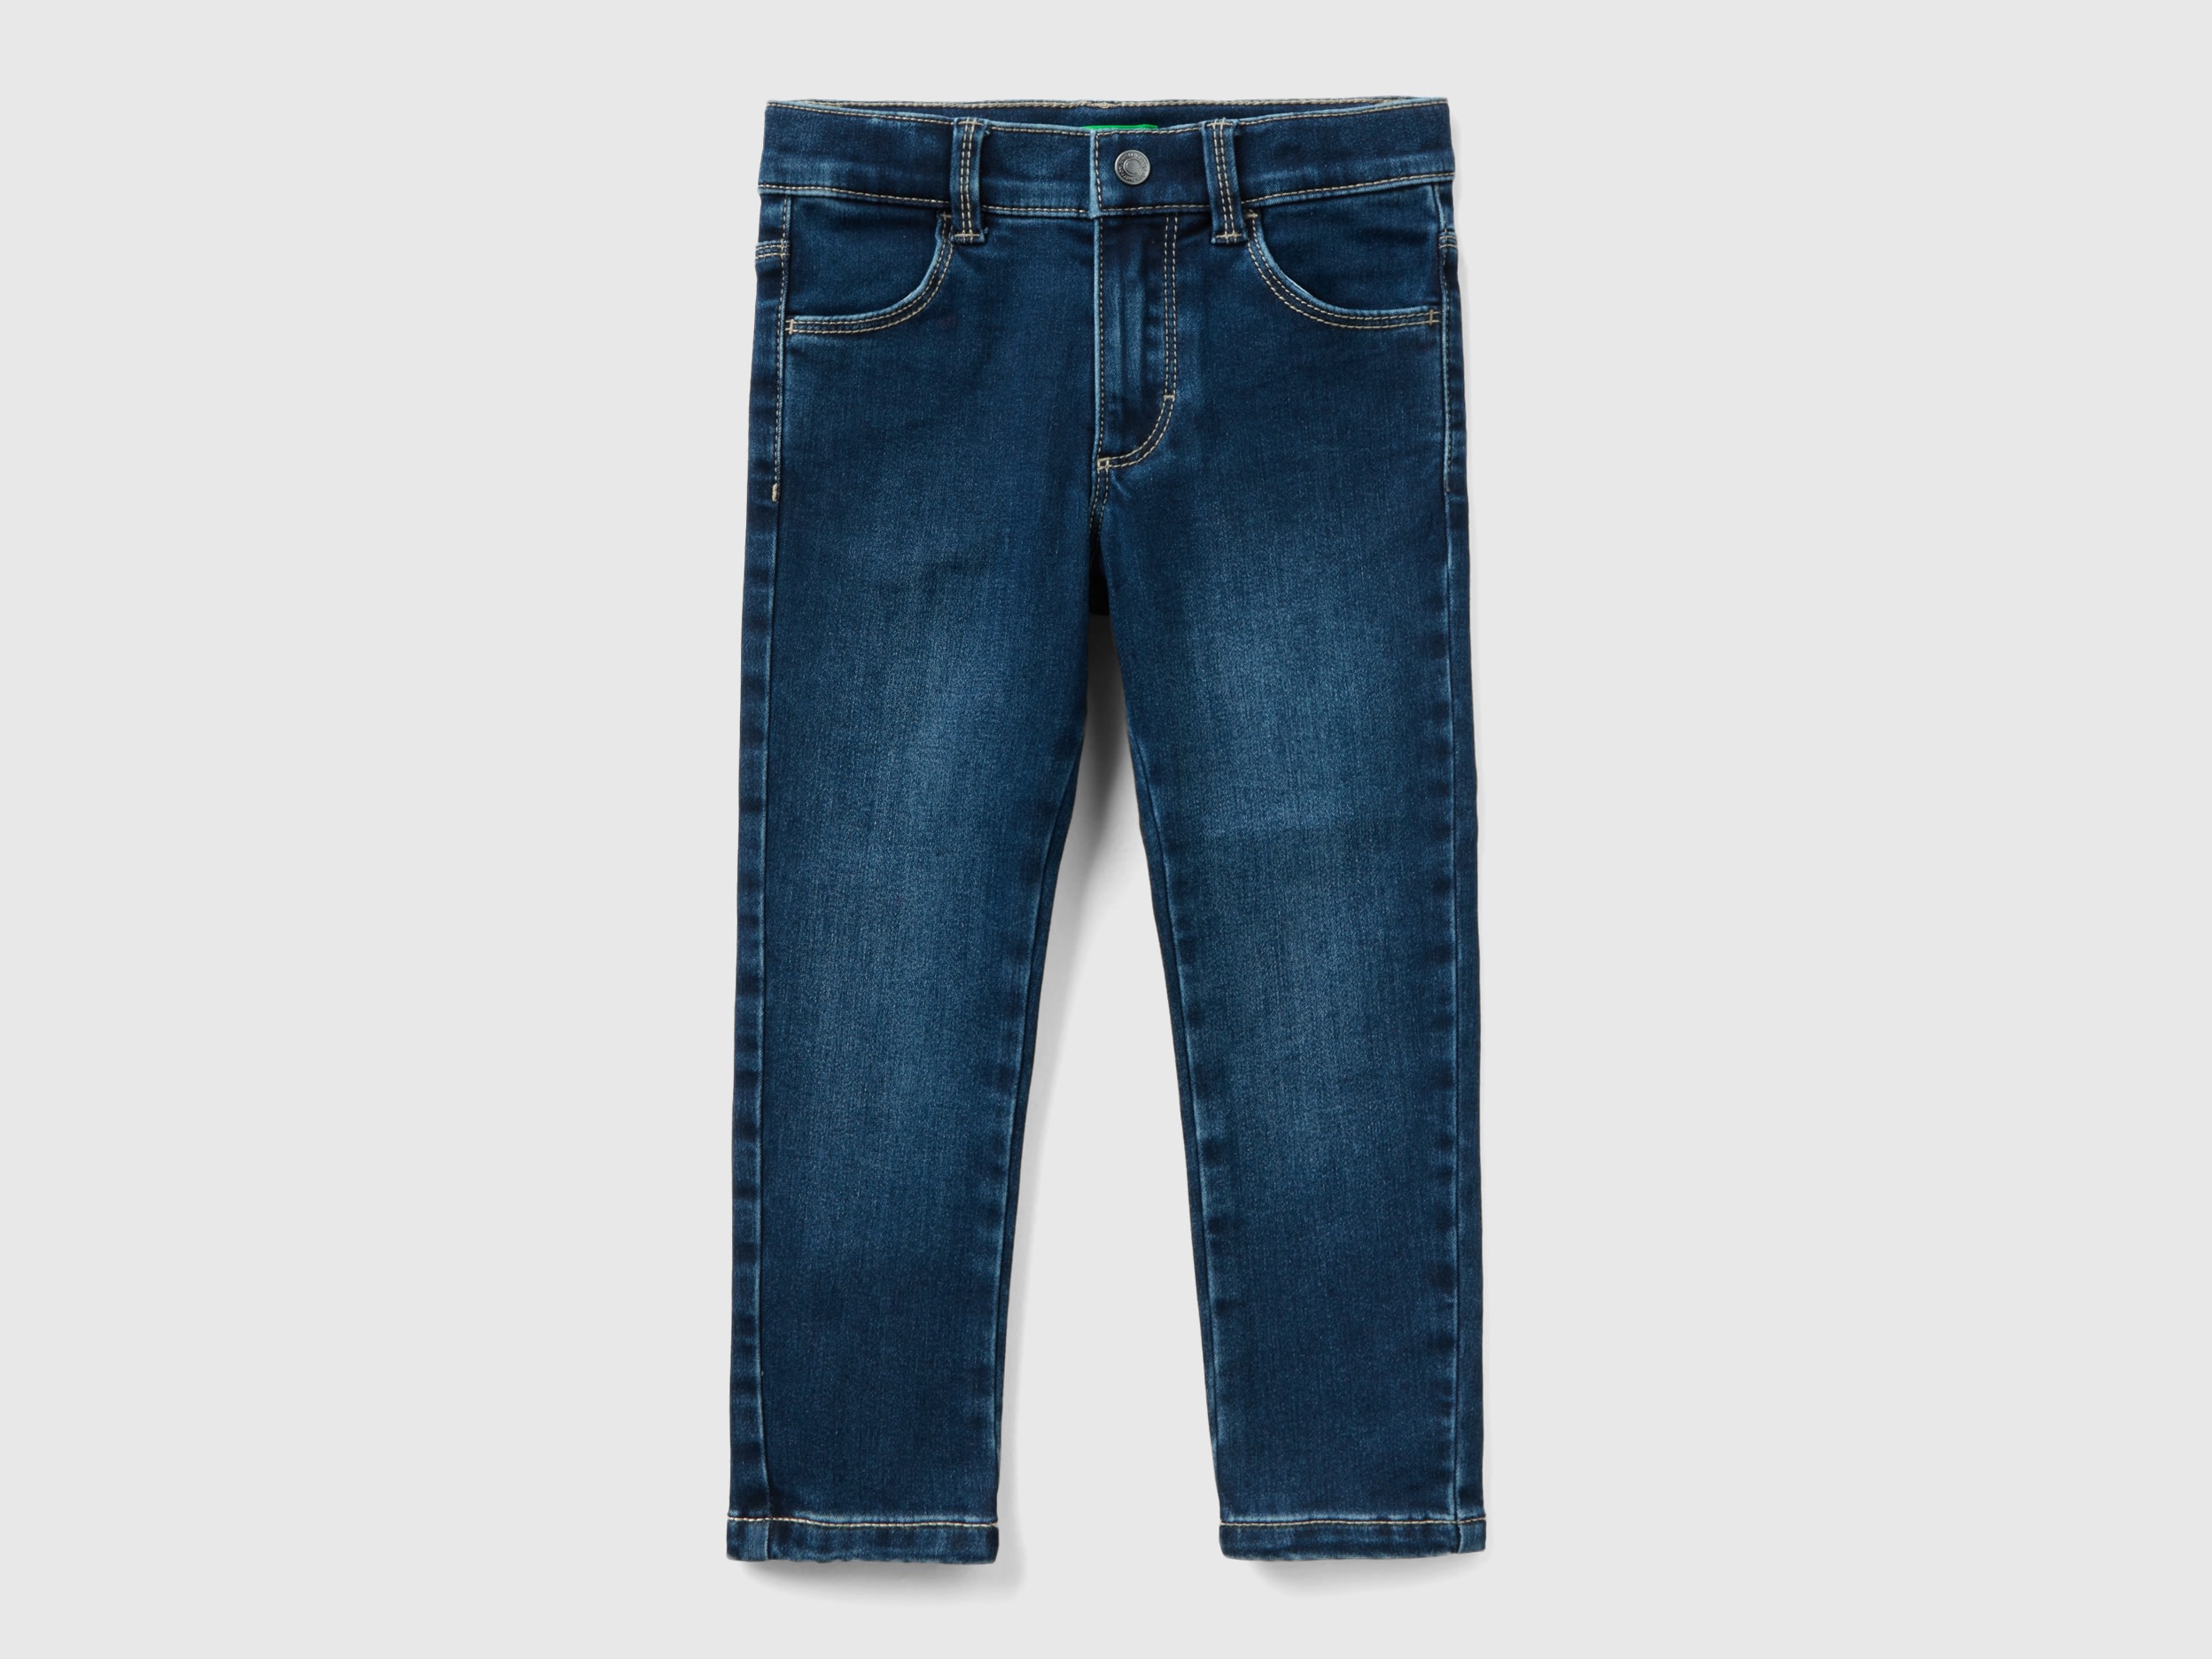 Benetton, Thermal Skinny Fit Jeans, size 3-4, Blue, Kids